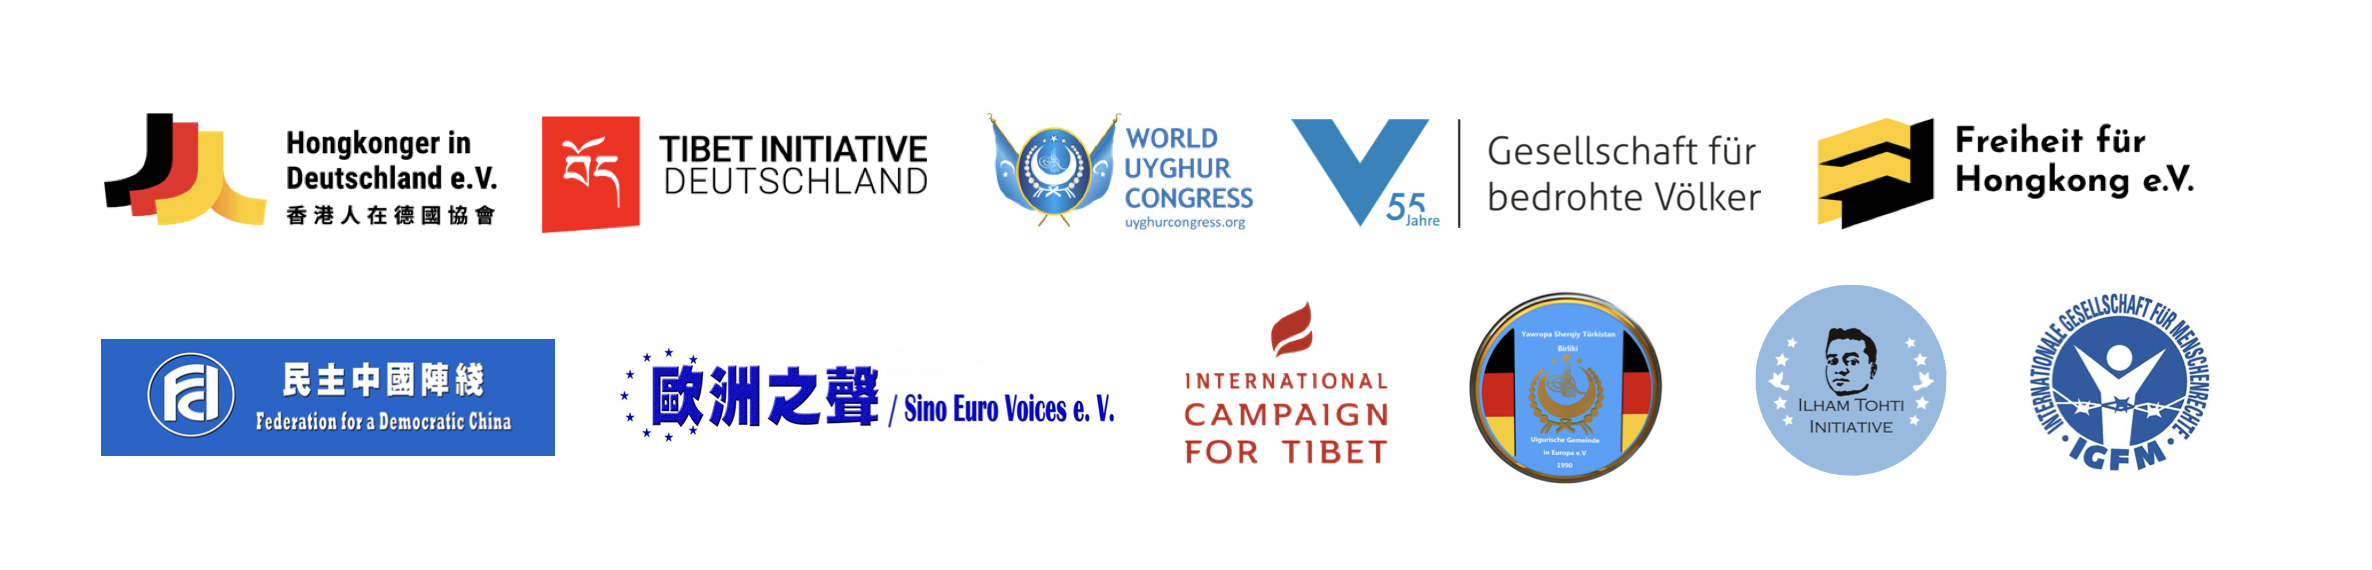 Joint Statement: Human Rights Organizations on German-Chinese Governmental Consultations – Responding to China’s Aggressive Policies